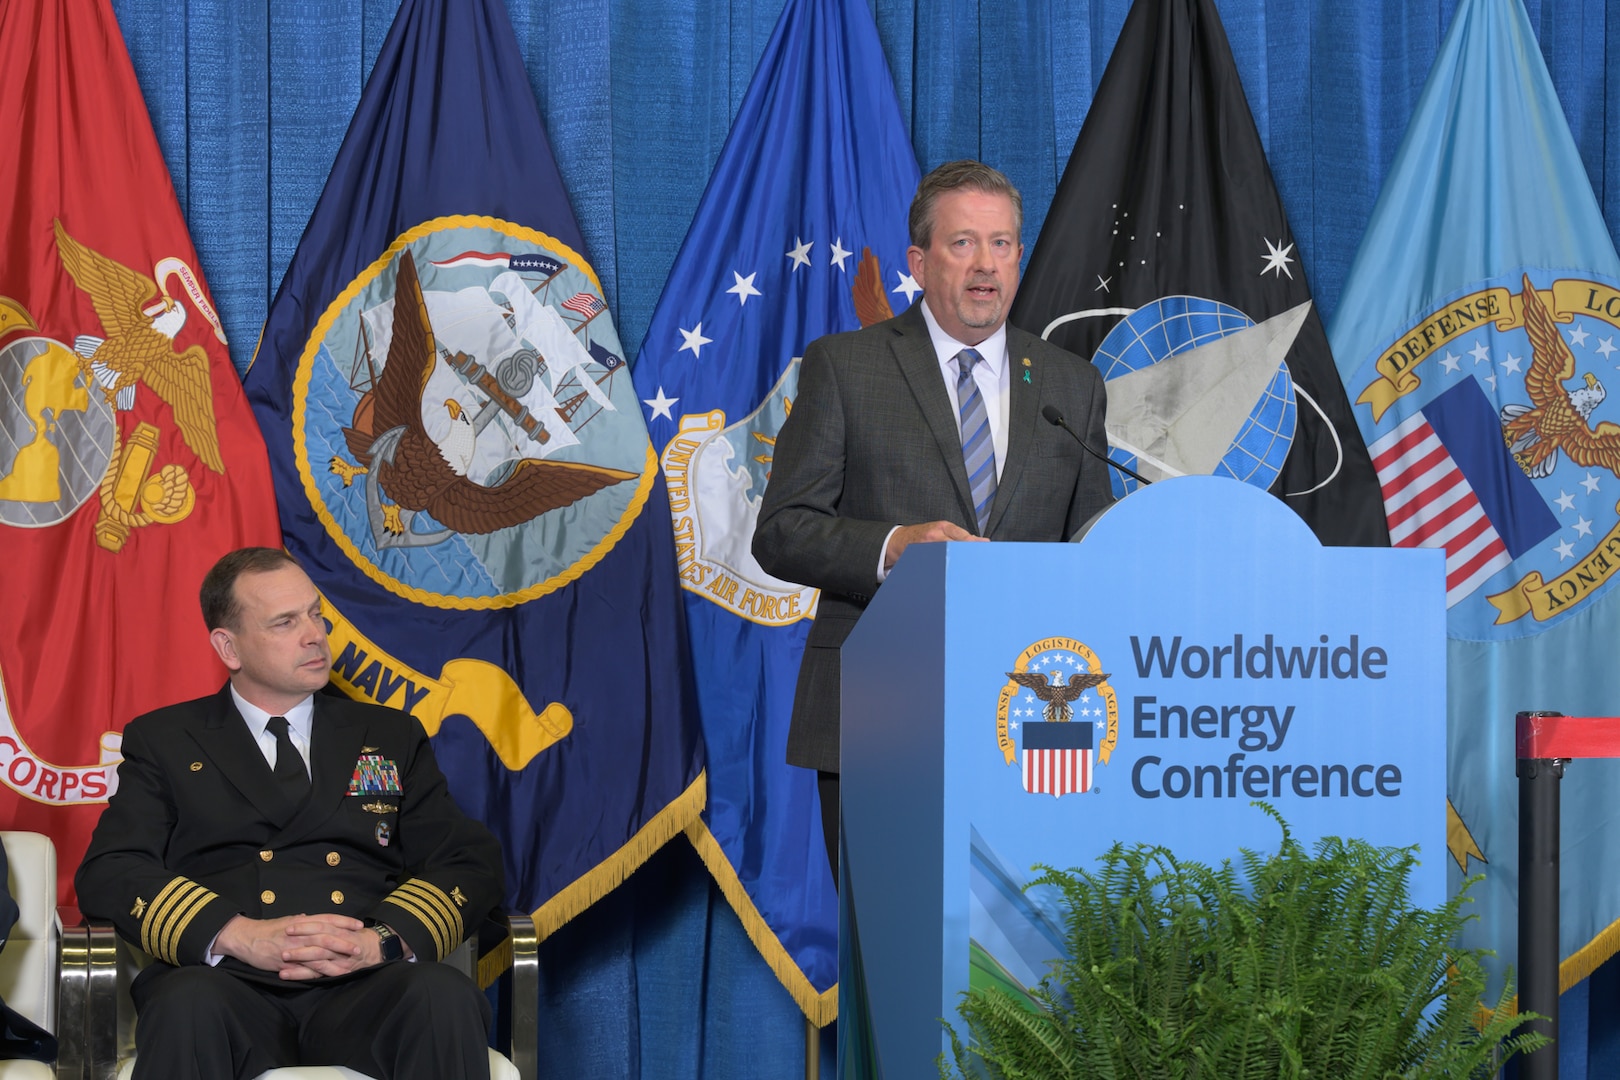 Man in a uniform speaks from a podium as a man in a Navy uniform sits to his side listening.